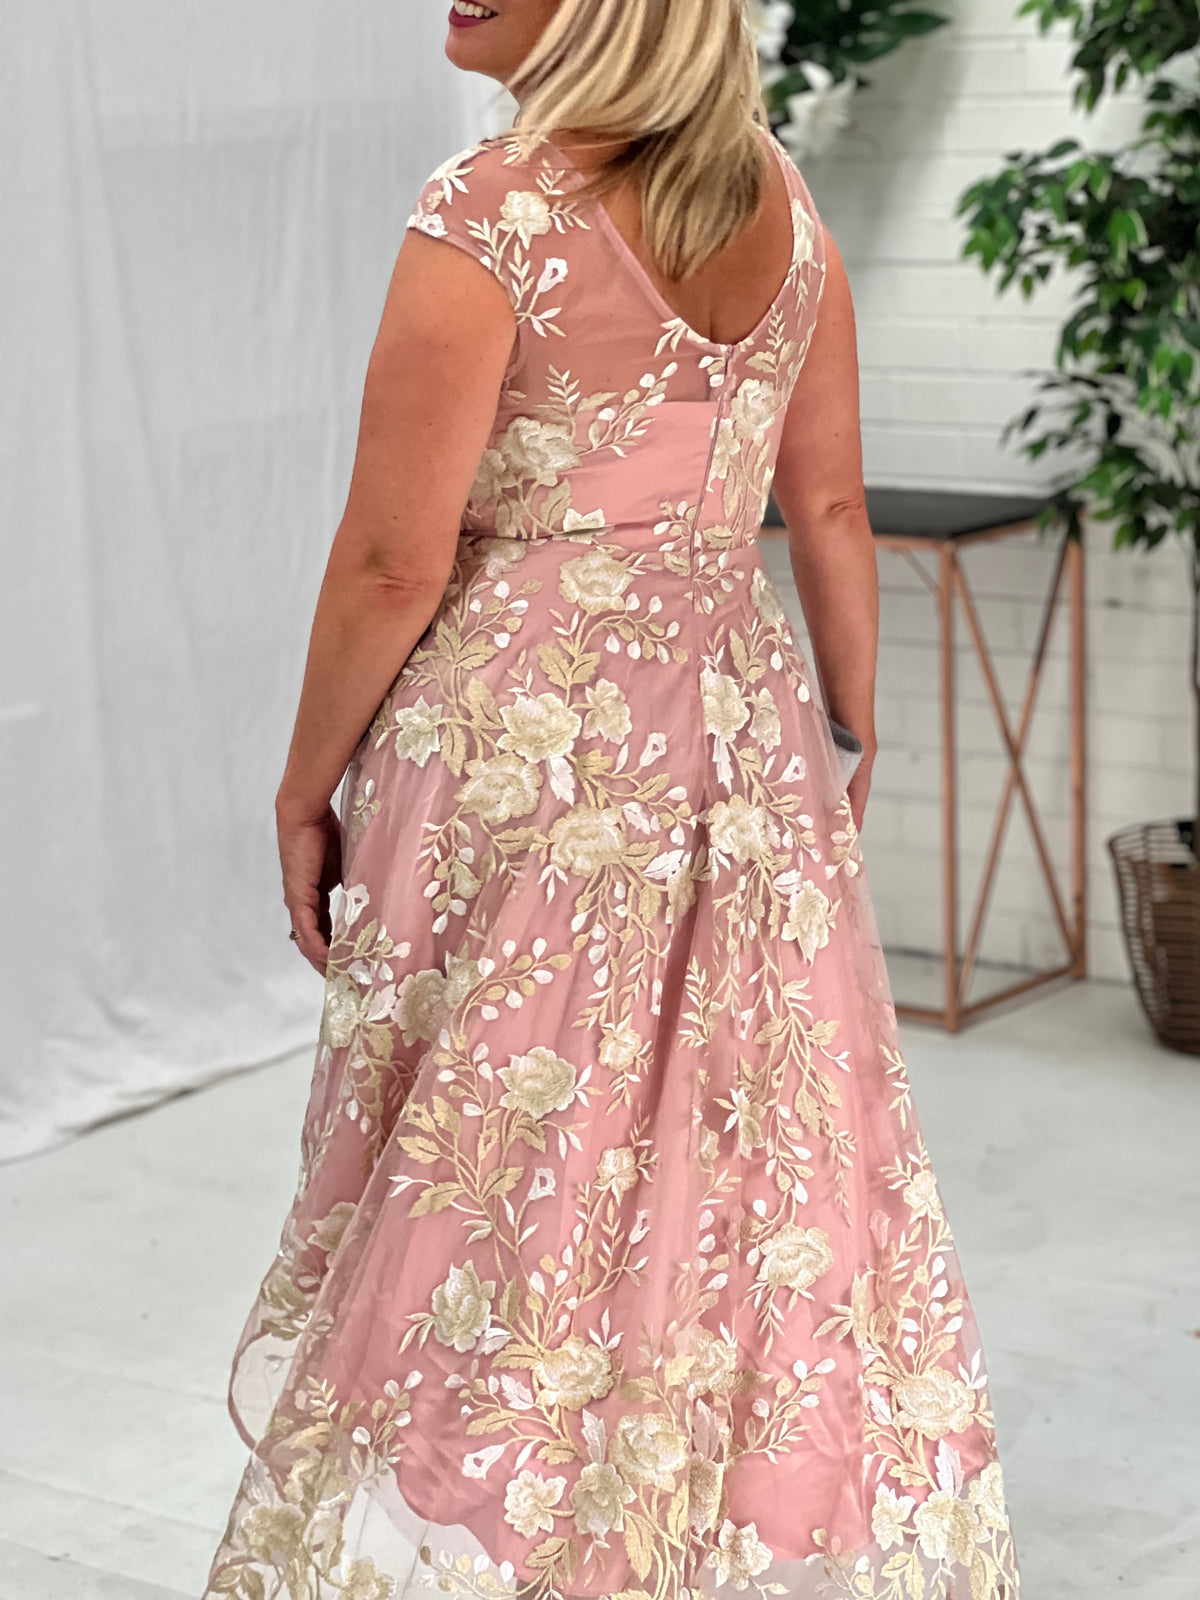 Ria Blush Embroidered Evening Dress